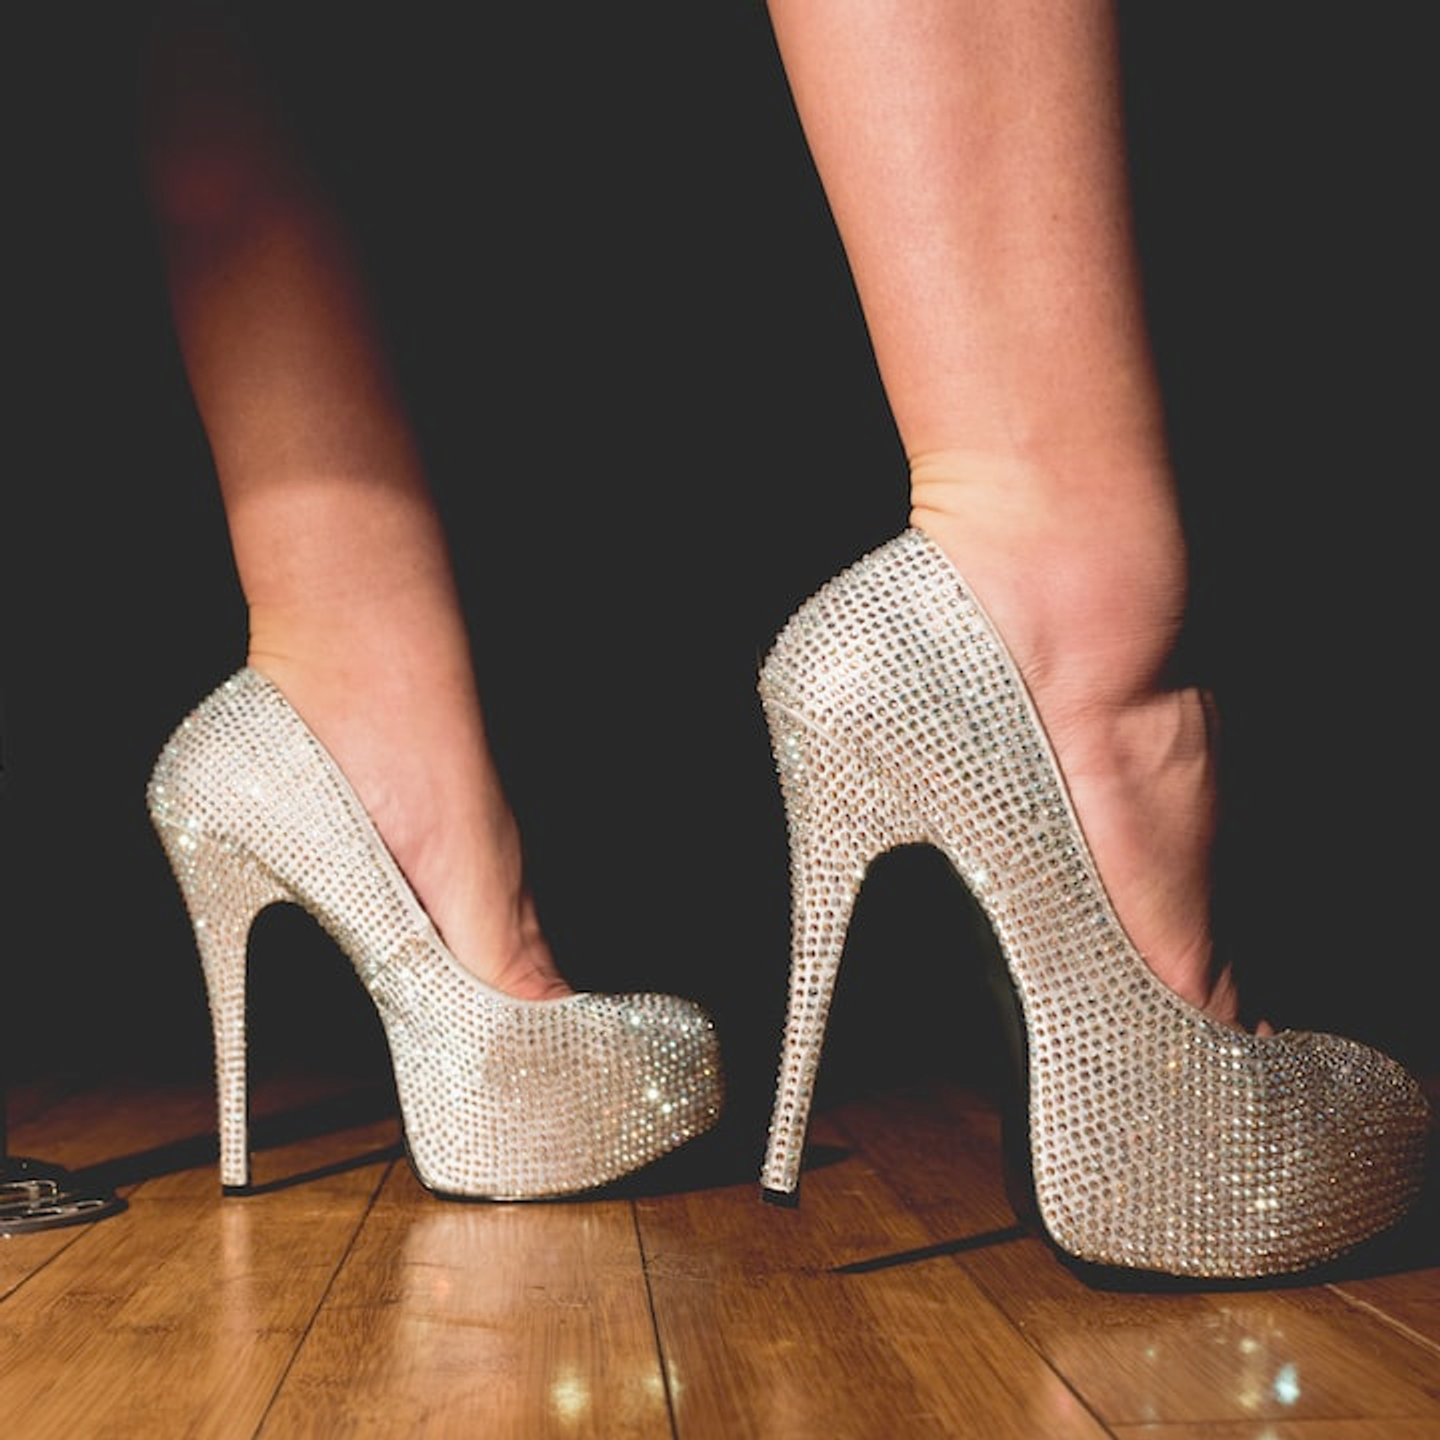 a woman wearing a pair of high heels with rhinestones on them​​​​‌﻿‍﻿​‍​‍‌‍﻿﻿‌﻿​‍‌‍‍‌‌‍‌﻿‌‍‍‌‌‍﻿‍​‍​‍​﻿‍‍​‍​‍‌﻿​﻿‌‍​‌‌‍﻿‍‌‍‍‌‌﻿‌​‌﻿‍‌​‍﻿‍‌‍‍‌‌‍﻿﻿​‍​‍​‍﻿​​‍​‍‌‍‍​‌﻿​‍‌‍‌‌‌‍‌‍​‍​‍​﻿‍‍​‍​‍‌‍‍​‌﻿‌​‌﻿‌​‌﻿​​‌﻿​﻿​﻿‍‍​‍﻿﻿​‍﻿﻿‌﻿‌‍‌‍‍‌‌﻿​﻿‌﻿‌‌‌‍​‌‌‍﻿​​‍﻿‌‌‍‌‌‌‍‌​‌‍‍‌‌﻿‌​‌‍‍‌‌‍﻿‍‌‍‌﻿​‍﻿‌‌﻿​﻿‌﻿‌​‌﻿‌‌‌‍‌​‌‍‍‌‌‍﻿﻿​‍﻿‍‌﻿​﻿‌‍​‌‌‍﻿‍‌‍‍‌‌﻿‌​‌﻿‍‌​‍﻿‍‌‍​‍‌﻿‌‌‌‍‍‌‌‍﻿​‌‍‌​​‍﻿﻿‌﻿​‍‌‍‌‌‌‍﻿‌‌‍‍‌‌﻿‍​​‍﻿﻿‌‍‍‌‌‍﻿‍‌﻿‌​‌‍‌‌‌‍﻿‍‌﻿‌​​‍﻿﻿‌‍‌‌‌‍‌​‌‍‍‌‌﻿‌​​‍﻿﻿‌‍﻿‌‌‍﻿﻿‌‍‌​‌‍‌‌​﻿﻿‌‌﻿​​‌﻿​‍‌‍‌‌‌﻿​﻿‌‍‌‌‌‍﻿‍‌﻿‌​‌‍​‌‌﻿‌​‌‍‍‌‌‍﻿﻿‌‍﻿‍​﻿‍﻿‌‍‍‌‌‍‌​​﻿﻿‌​﻿‌﻿‌‍‌‌‌‍‌‌​﻿‍‌​﻿‌‍​﻿​‌‌‍‌‌​﻿​​​‍﻿‌​﻿‍‌​﻿​‍​﻿‌‍‌‍‌‌​‍﻿‌​﻿‌​‌‍‌​‌‍‌​​﻿‌﻿​‍﻿‌‌‍​‍​﻿​‍​﻿‍​​﻿‍‌​‍﻿‌​﻿‌‌​﻿‌﻿‌‍​‍‌‍‌‍‌‍​‌​﻿‌​‌‍‌​​﻿​​​﻿​‍‌‍​‍‌‍‌‌​﻿‌​​﻿‍﻿‌﻿‌​‌﻿‍‌‌﻿​​‌‍‌‌​﻿﻿‌‌﻿​﻿‌‍‍​‌‍﻿﻿‌‍‌‌​﻿‍﻿‌﻿​​‌‍​‌‌﻿‌​‌‍‍​​﻿﻿‌‌‍﻿‌‌‍‌‌‌‍‌​‌‍‍‌‌‍​‌​‍‌‌​﻿‌‌‌​​‍‌‌﻿﻿‌‍‍﻿‌‍‌‌‌﻿‍‌​‍‌‌​﻿​﻿‌​‌​​‍‌‌​﻿​﻿‌​‌​​‍‌‌​﻿​‍​﻿​‍‌‍​‌‌‍‌​​﻿‌‌‌‍‌‌​﻿‍‌‌‍​‌​﻿‌﻿‌‍‌​‌‍​‌​﻿‍​​﻿​‍​﻿‍​​‍‌‌​﻿​‍​﻿​‍​‍‌‌​﻿‌‌‌​‌​​‍﻿‍‌‍​‌‌‍﻿​‌﻿‌​​﻿‍﻿‌﻿‌​‌‍﻿﻿‌‍﻿﻿‌‍﻿​​﻿﻿‌‌﻿​​‌﻿​‍‌‍‌‌‌﻿​﻿‌‍‌‌‌‍﻿‍‌﻿‌​‌‍​‌‌﻿‌​‌‍‍‌‌‍﻿﻿‌‍﻿‍​﻿﻿﻿‌‍​‍‌‍​‌‌﻿​﻿‌‍‌‌‌‌‌‌‌﻿​‍‌‍﻿​​﻿﻿‌‌‍‍​‌﻿‌​‌﻿‌​‌﻿​​‌﻿​﻿​‍‌‌​﻿​﻿‌​​‌​‍‌‌​﻿​‍‌​‌‍​‍‌‌​﻿​‍‌​‌‍‌﻿‌‍‌‍‍‌‌﻿​﻿‌﻿‌‌‌‍​‌‌‍﻿​​‍﻿‌‌‍‌‌‌‍‌​‌‍‍‌‌﻿‌​‌‍‍‌‌‍﻿‍‌‍‌﻿​‍﻿‌‌﻿​﻿‌﻿‌​‌﻿‌‌‌‍‌​‌‍‍‌‌‍﻿﻿​‍﻿‍‌﻿​﻿‌‍​‌‌‍﻿‍‌‍‍‌‌﻿‌​‌﻿‍‌​‍﻿‍‌‍​‍‌﻿‌‌‌‍‍‌‌‍﻿​‌‍‌​​‍‌‍‌‍‍‌‌‍‌​​﻿﻿‌​﻿‌﻿‌‍‌‌‌‍‌‌​﻿‍‌​﻿‌‍​﻿​‌‌‍‌‌​﻿​​​‍﻿‌​﻿‍‌​﻿​‍​﻿‌‍‌‍‌‌​‍﻿‌​﻿‌​‌‍‌​‌‍‌​​﻿‌﻿​‍﻿‌‌‍​‍​﻿​‍​﻿‍​​﻿‍‌​‍﻿‌​﻿‌‌​﻿‌﻿‌‍​‍‌‍‌‍‌‍​‌​﻿‌​‌‍‌​​﻿​​​﻿​‍‌‍​‍‌‍‌‌​﻿‌​​‍‌‍‌﻿‌​‌﻿‍‌‌﻿​​‌‍‌‌​﻿﻿‌‌﻿​﻿‌‍‍​‌‍﻿﻿‌‍‌‌​‍‌‍‌﻿​​‌‍​‌‌﻿‌​‌‍‍​​﻿﻿‌‌‍﻿‌‌‍‌‌‌‍‌​‌‍‍‌‌‍​‌​‍‌‌​﻿‌‌‌​​‍‌‌﻿﻿‌‍‍﻿‌‍‌‌‌﻿‍‌​‍‌‌​﻿​﻿‌​‌​​‍‌‌​﻿​﻿‌​‌​​‍‌‌​﻿​‍​﻿​‍‌‍​‌‌‍‌​​﻿‌‌‌‍‌‌​﻿‍‌‌‍​‌​﻿‌﻿‌‍‌​‌‍​‌​﻿‍​​﻿​‍​﻿‍​​‍‌‌​﻿​‍​﻿​‍​‍‌‌​﻿‌‌‌​‌​​‍﻿‍‌‍​‌‌‍﻿​‌﻿‌​​‍‌‍‌﻿‌﻿‌‍﻿﻿‌﻿​‍‌‍‍﻿‌﻿​﻿‌﻿​​‌‍​‌‌‍​﻿‌‍‌‌​﻿﻿‌‌﻿​‍‌‍‌‌‌‍﻿‌‌‍‍‌‌﻿‍​​‍‌‍‌﻿‌​‌‍﻿﻿‌‍﻿﻿‌‍﻿​​﻿﻿‌‌﻿​​‌﻿​‍‌‍‌‌‌﻿​﻿‌‍‌‌‌‍﻿‍‌﻿‌​‌‍​‌‌﻿‌​‌‍‍‌‌‍﻿﻿‌‍﻿‍​‍​‍‌﻿﻿‌